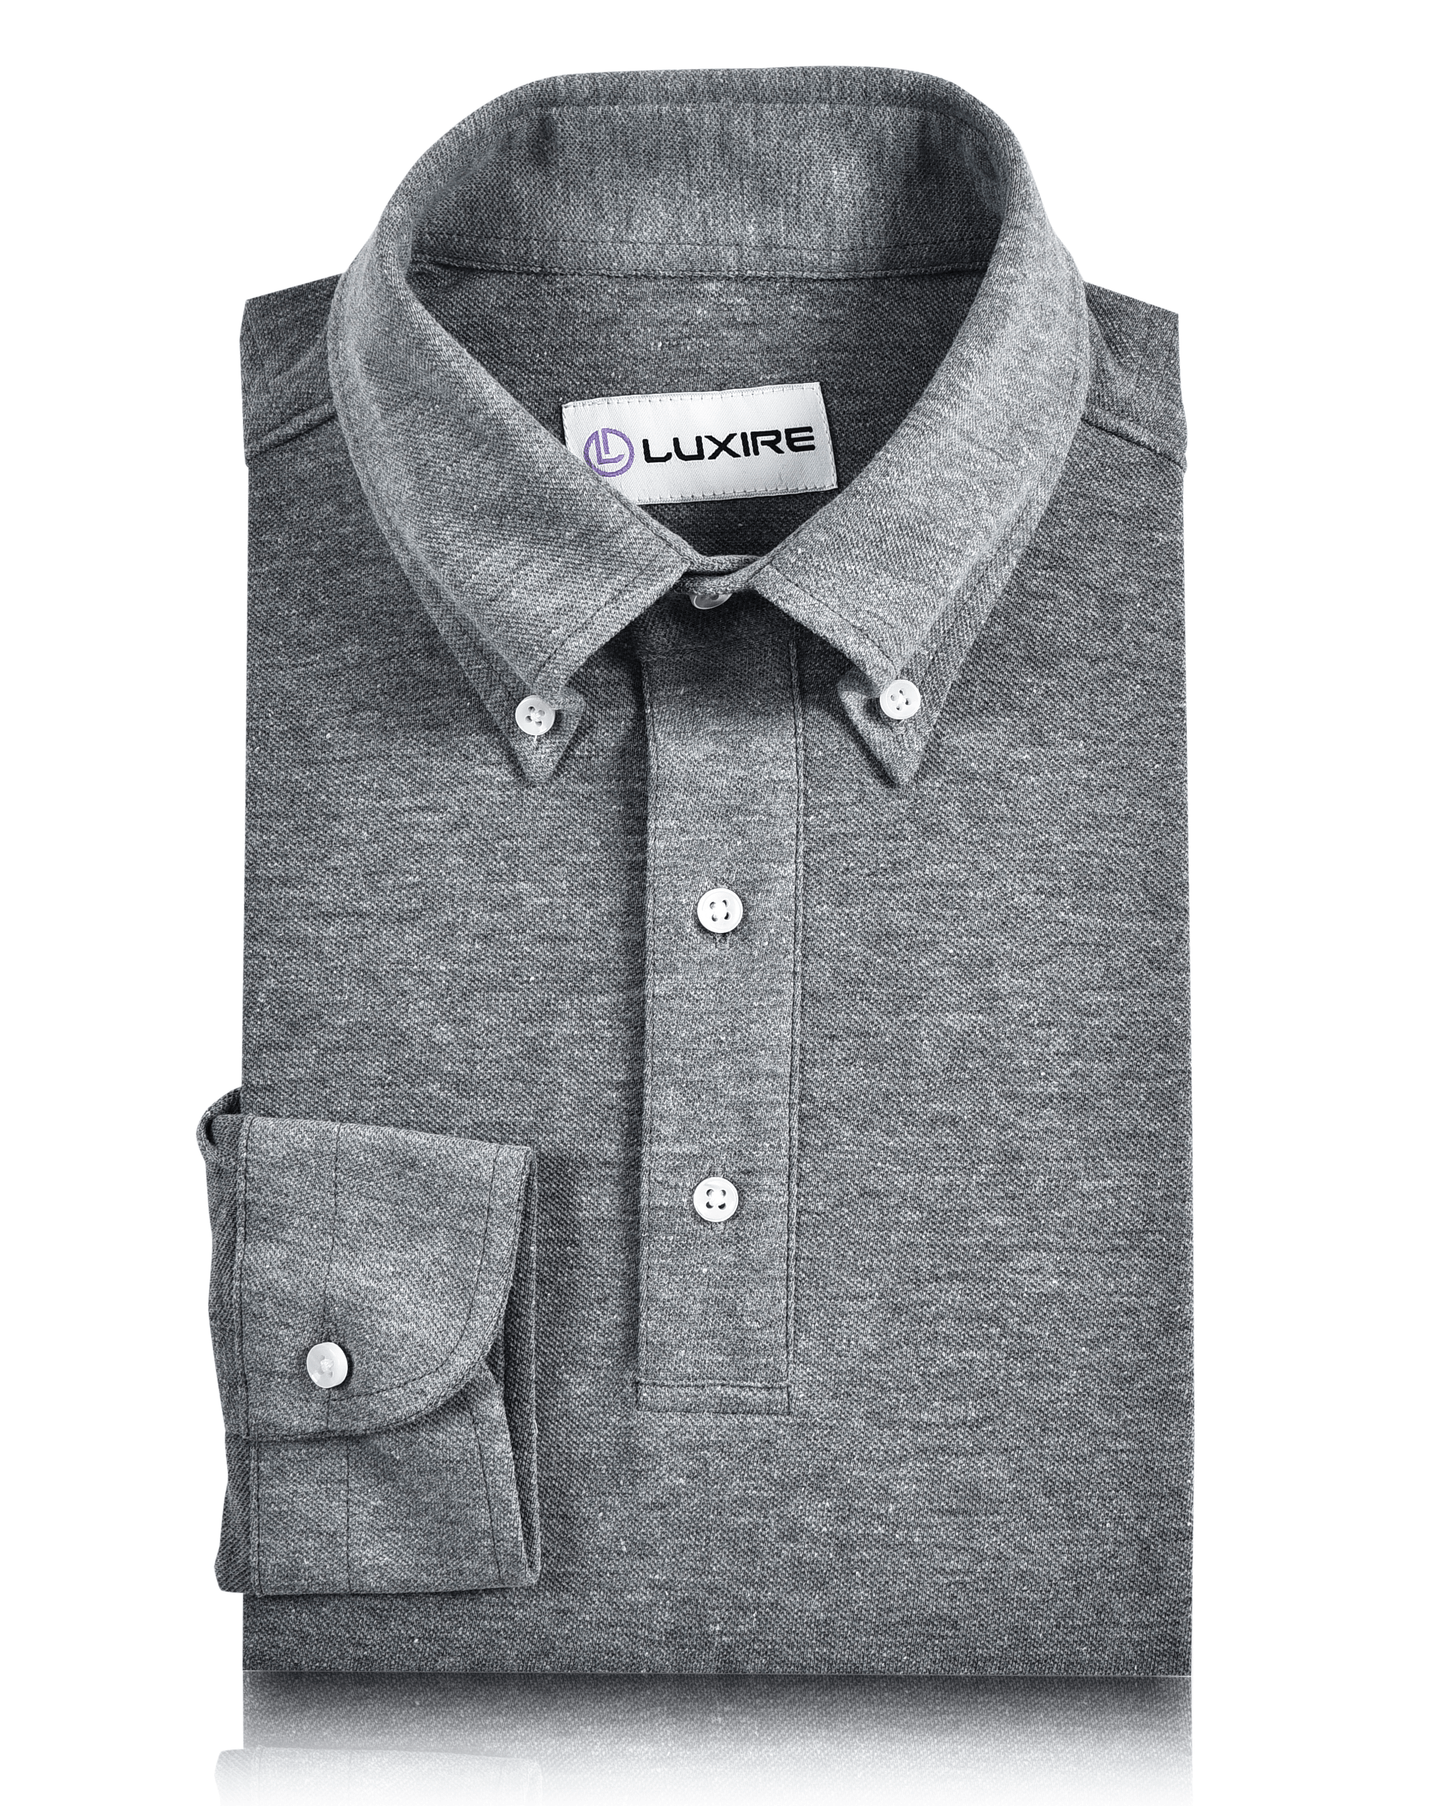 Front of the custom oxford polo shirt for men by Luxire in slate grey